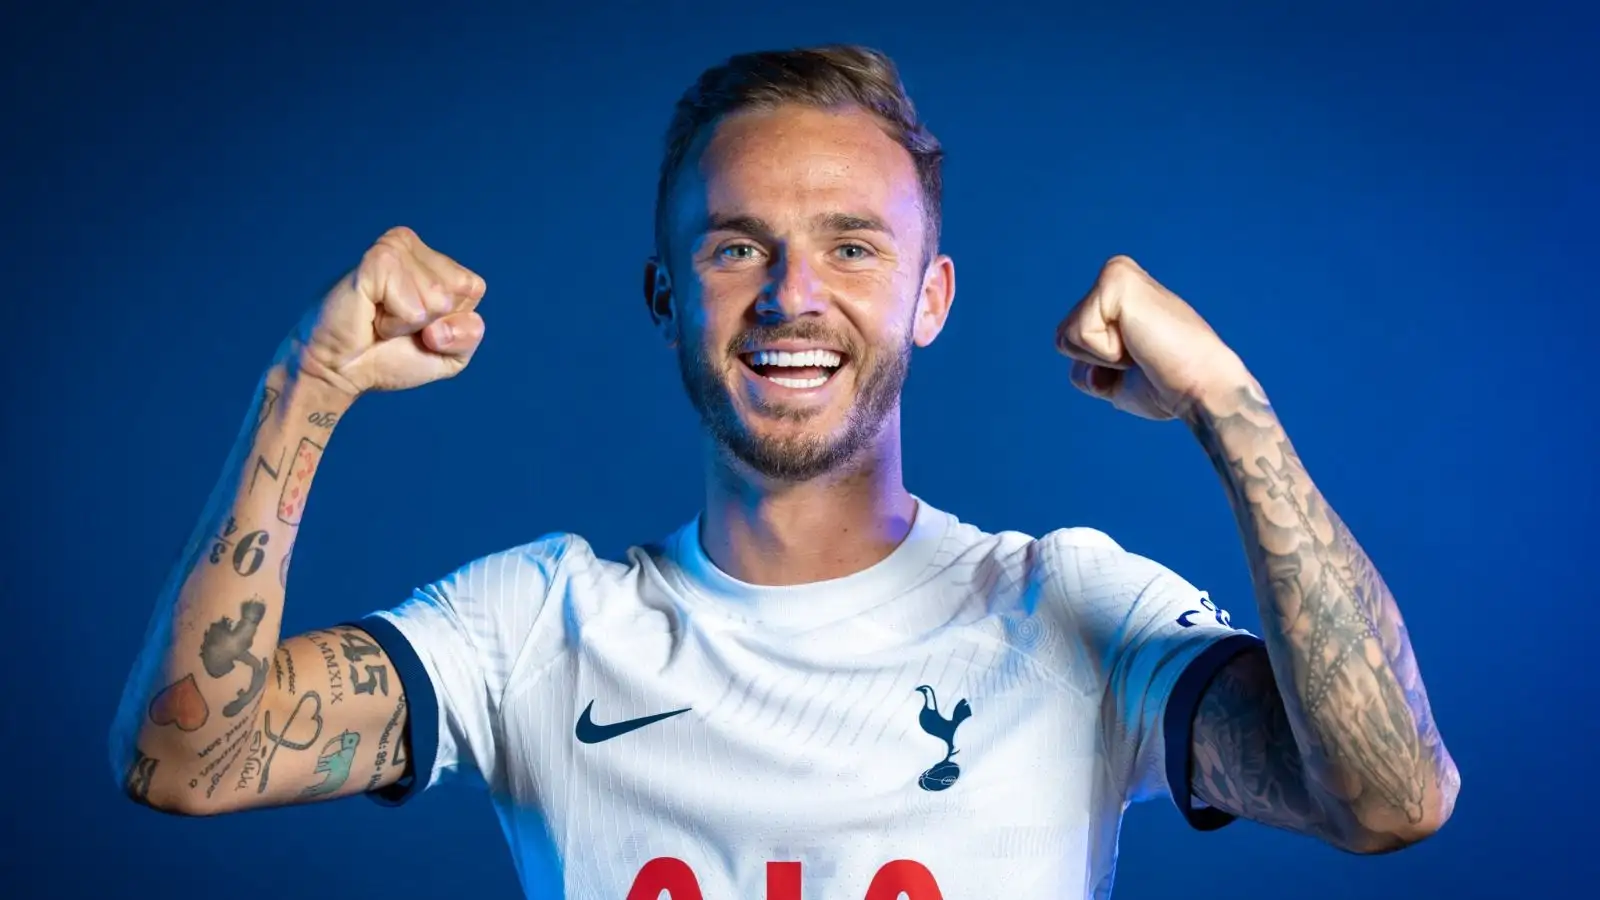 James Maddison seals £40m Spurs move from Leicester